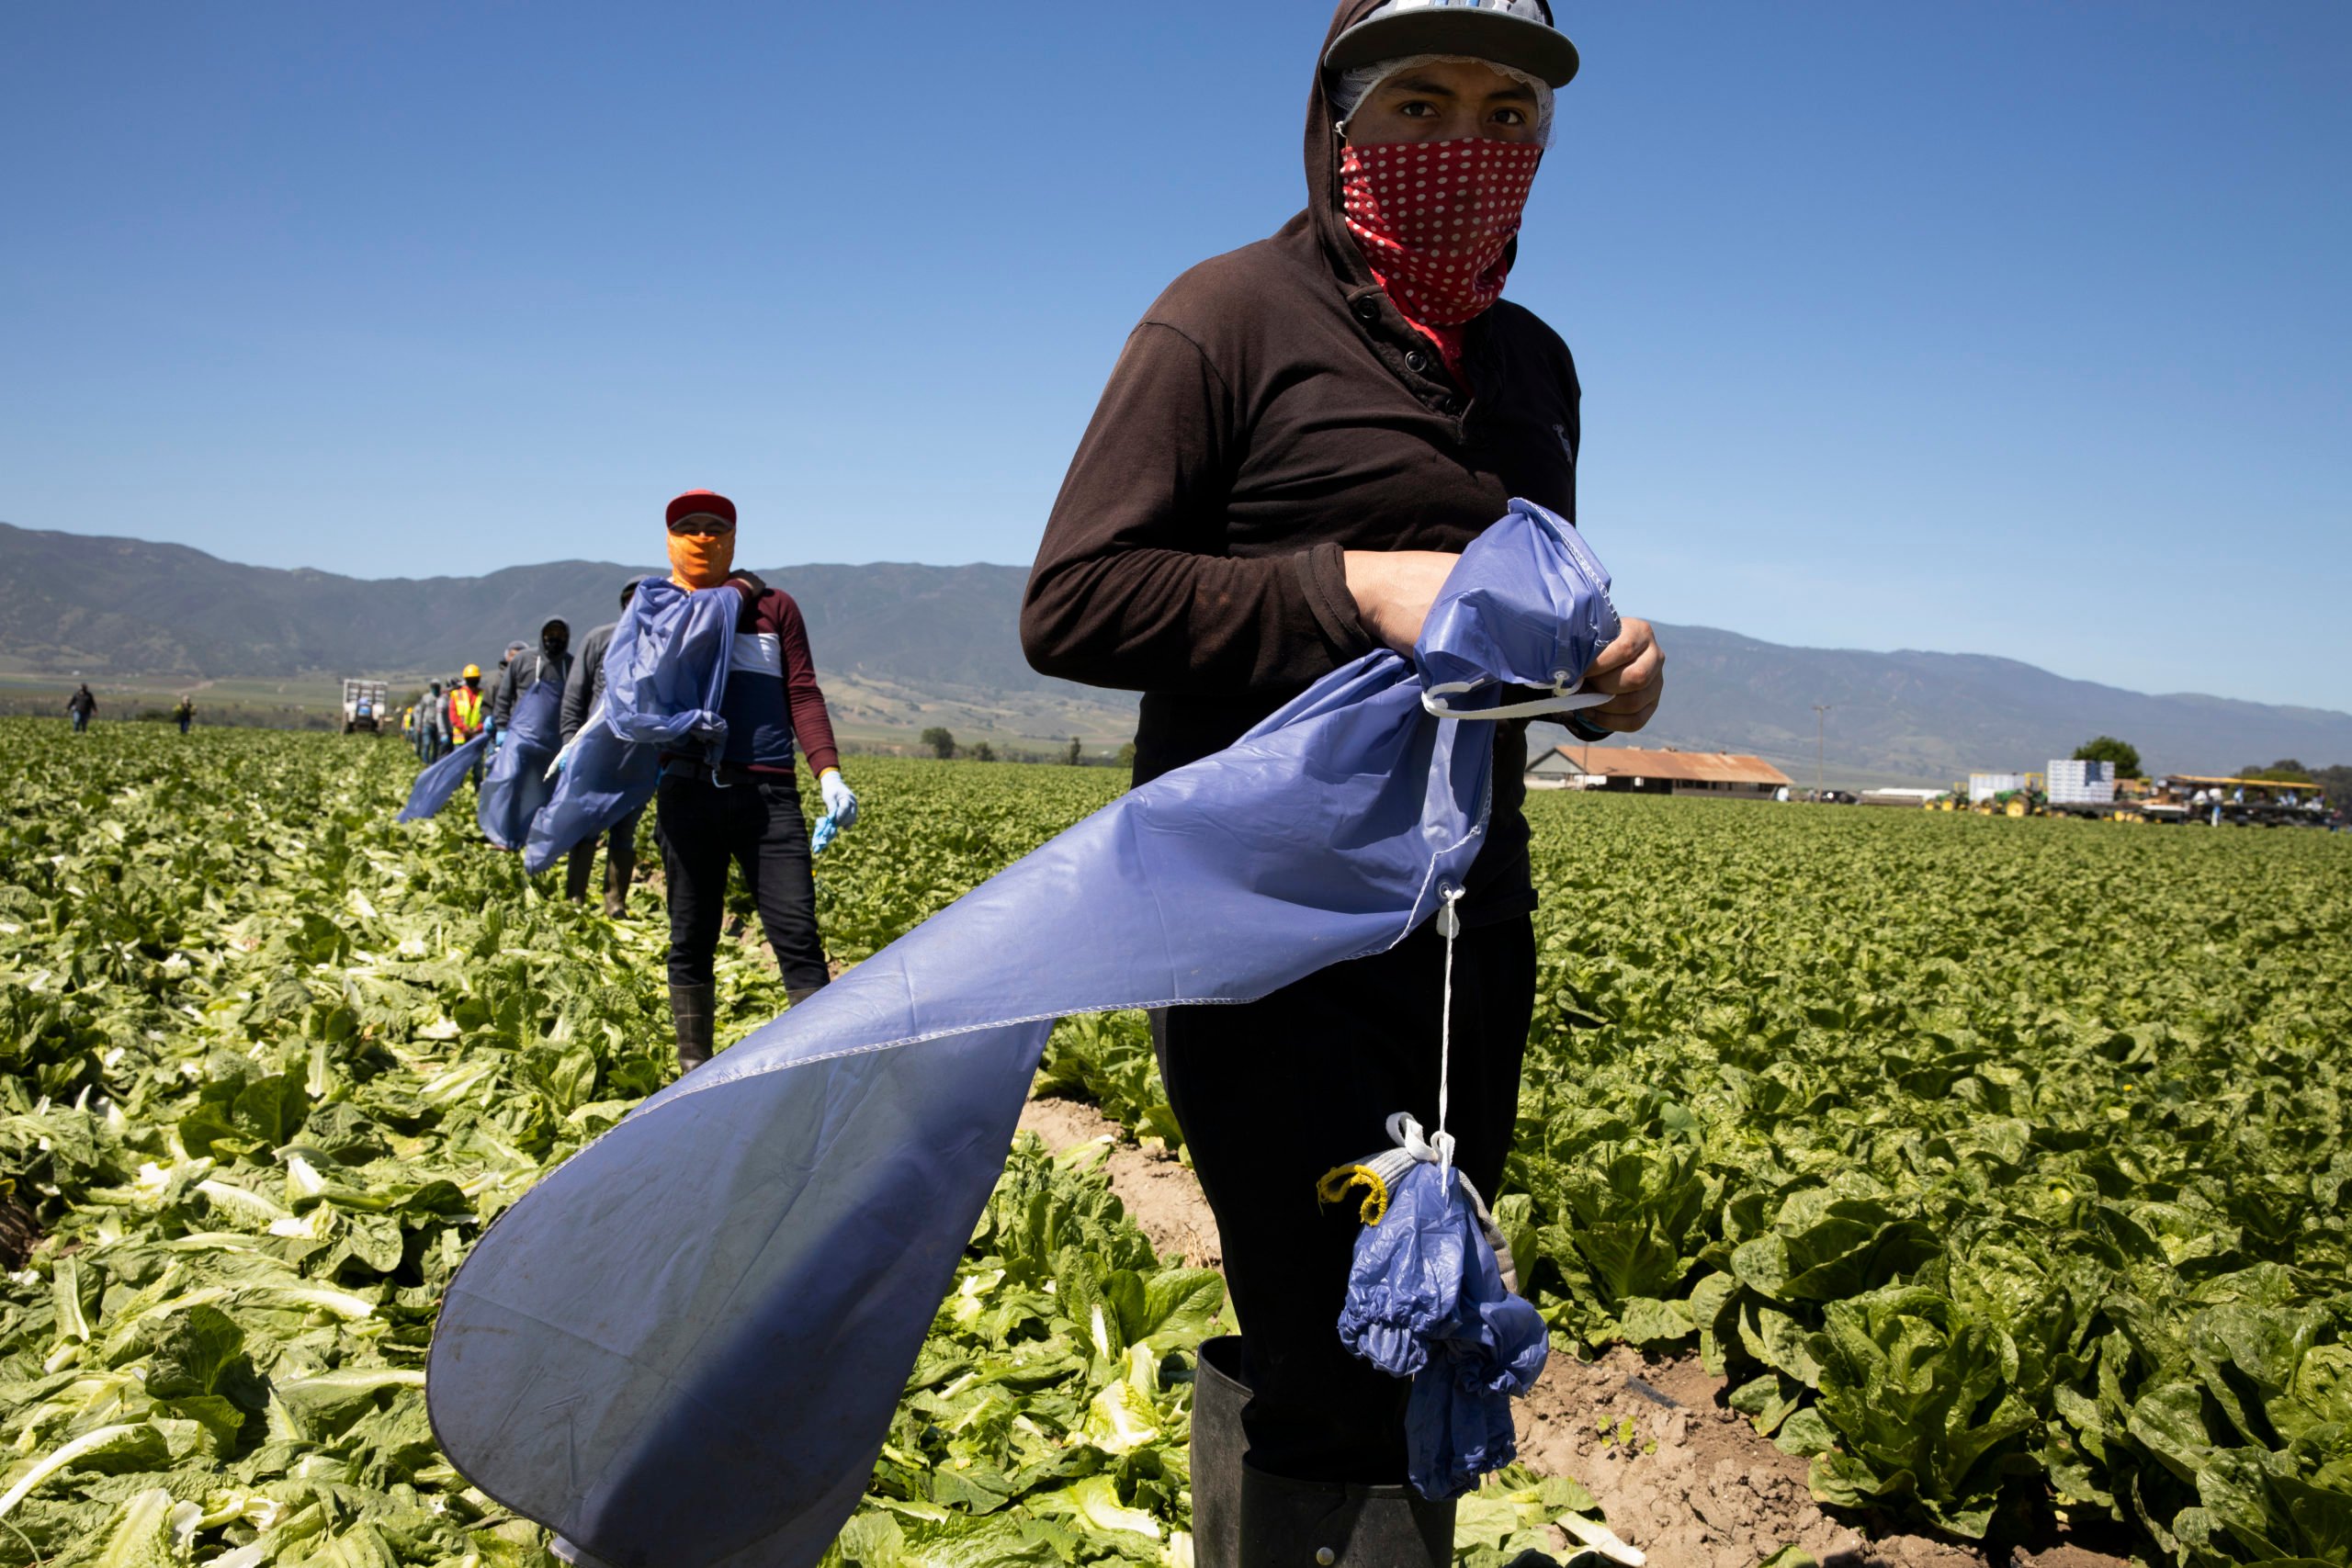 Farm laborers line up to get lunch in April 2020 in Greenfield, California. (Brent Stirton/Getty Images)